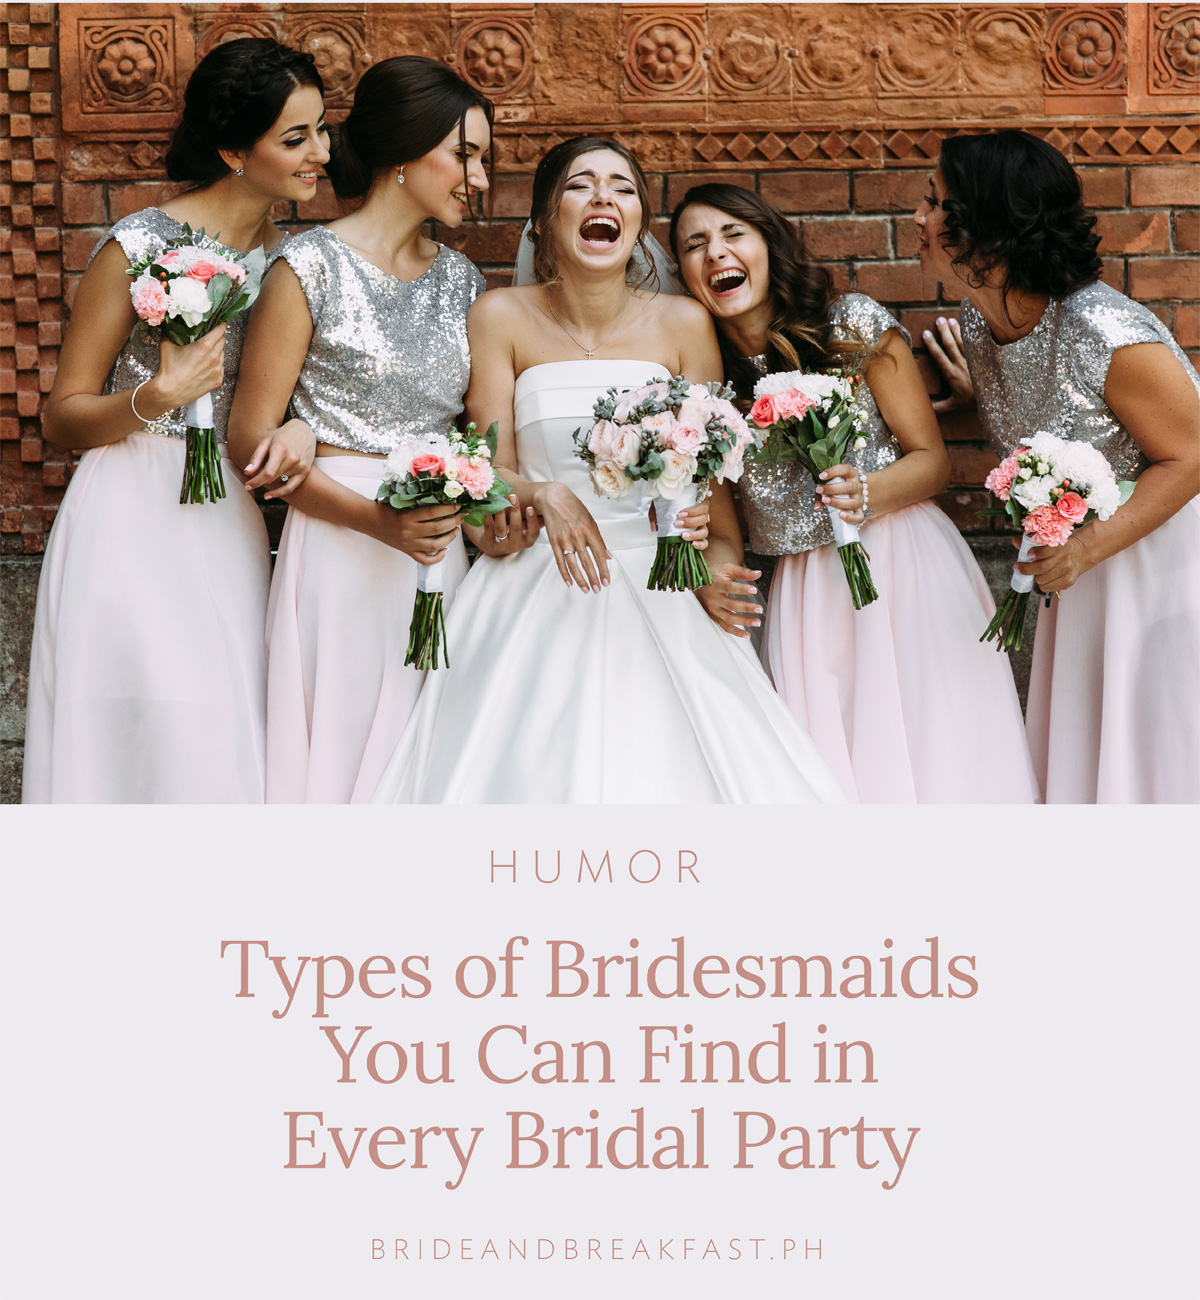 9 Types of Bridesmaids You Can Find in Every Bridal Party (In GIFs!)